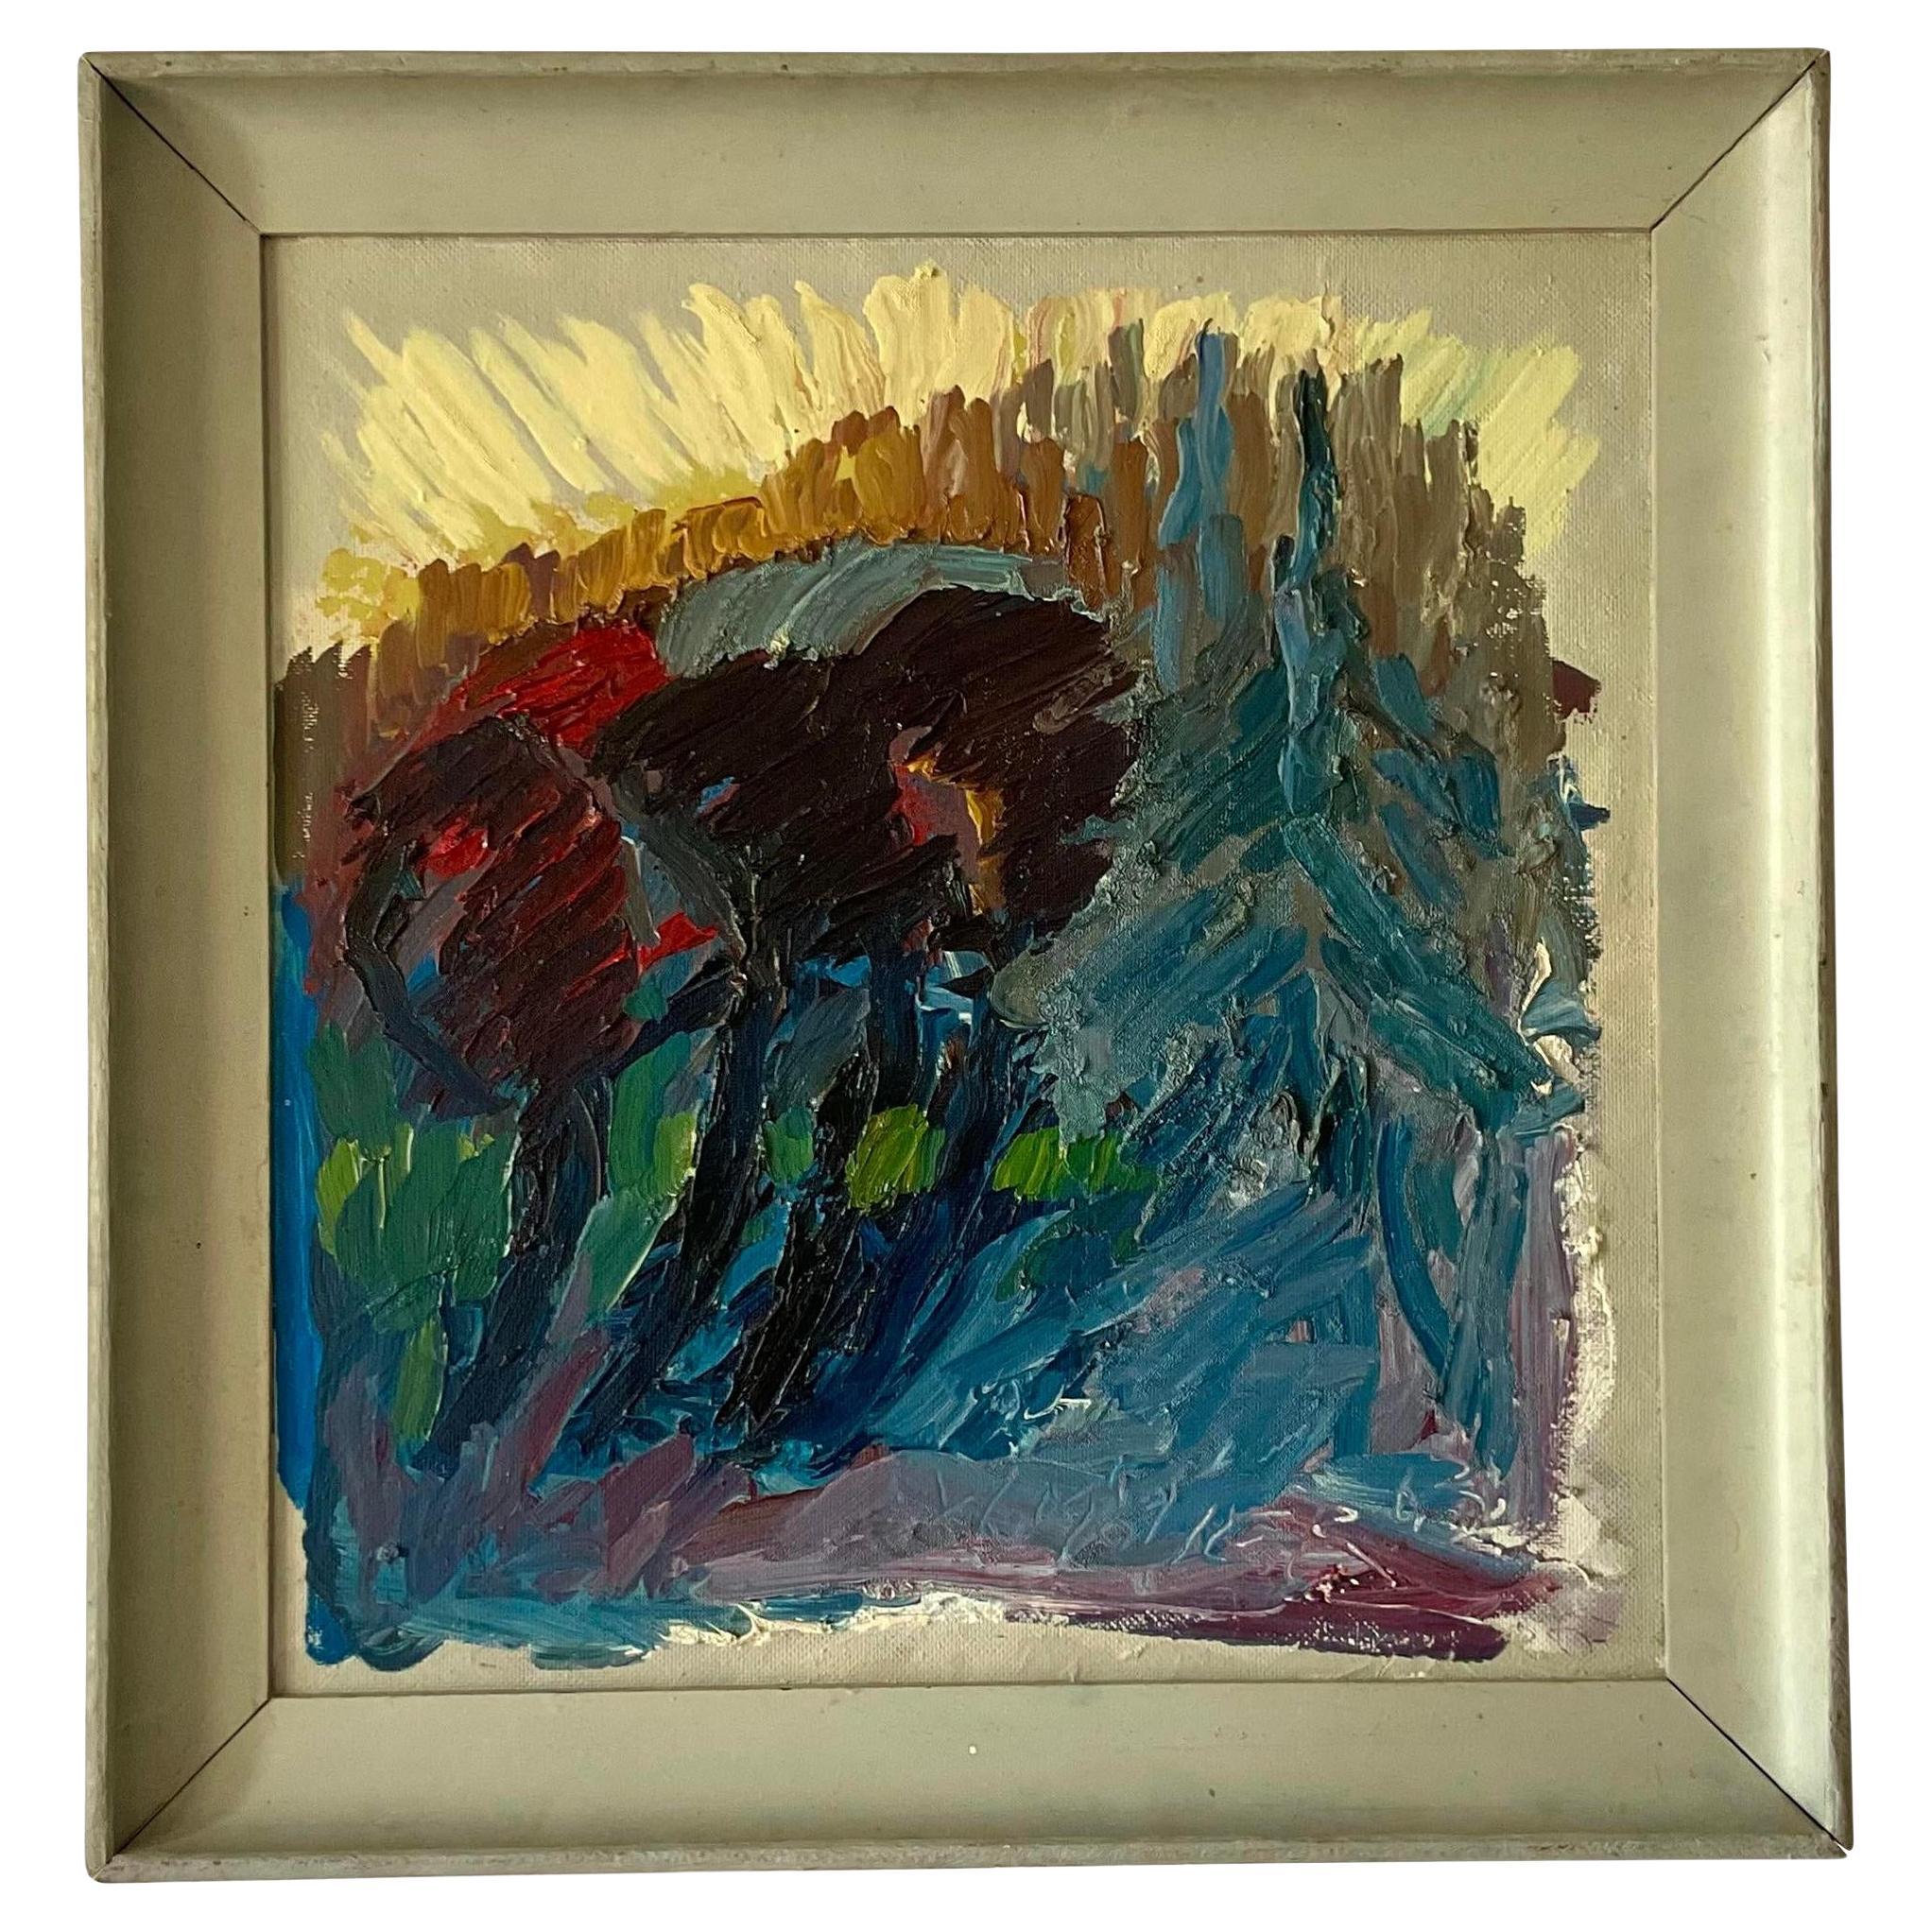 Vintage Boho Abstract Expressionist Signed Original Oil on Canvas 1963